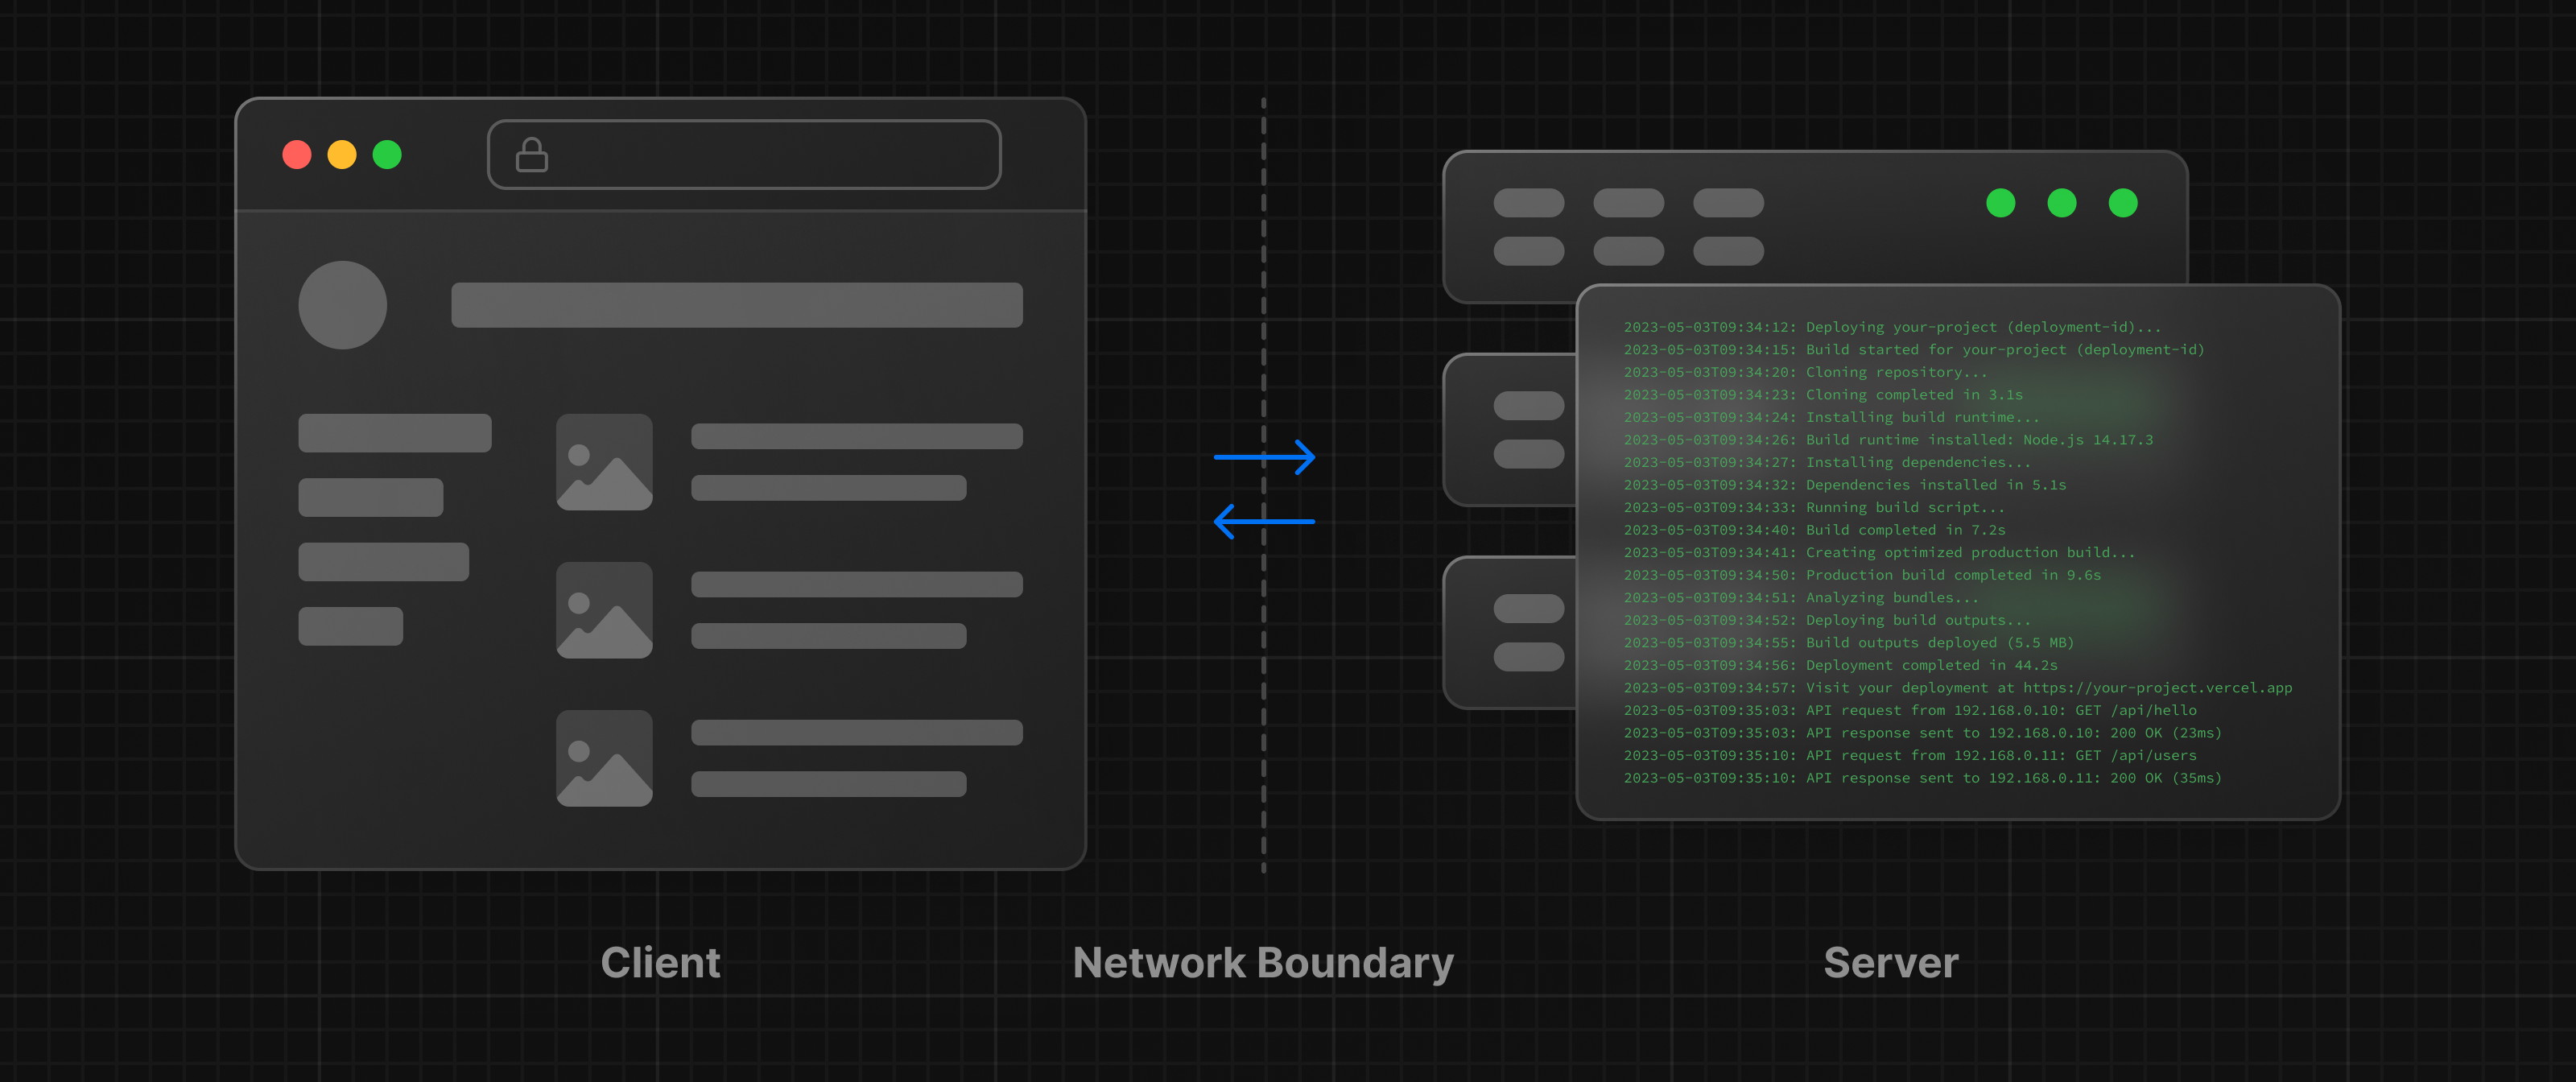 Diagram showing a browser on the left and a server on the right, separated by a network boundary.